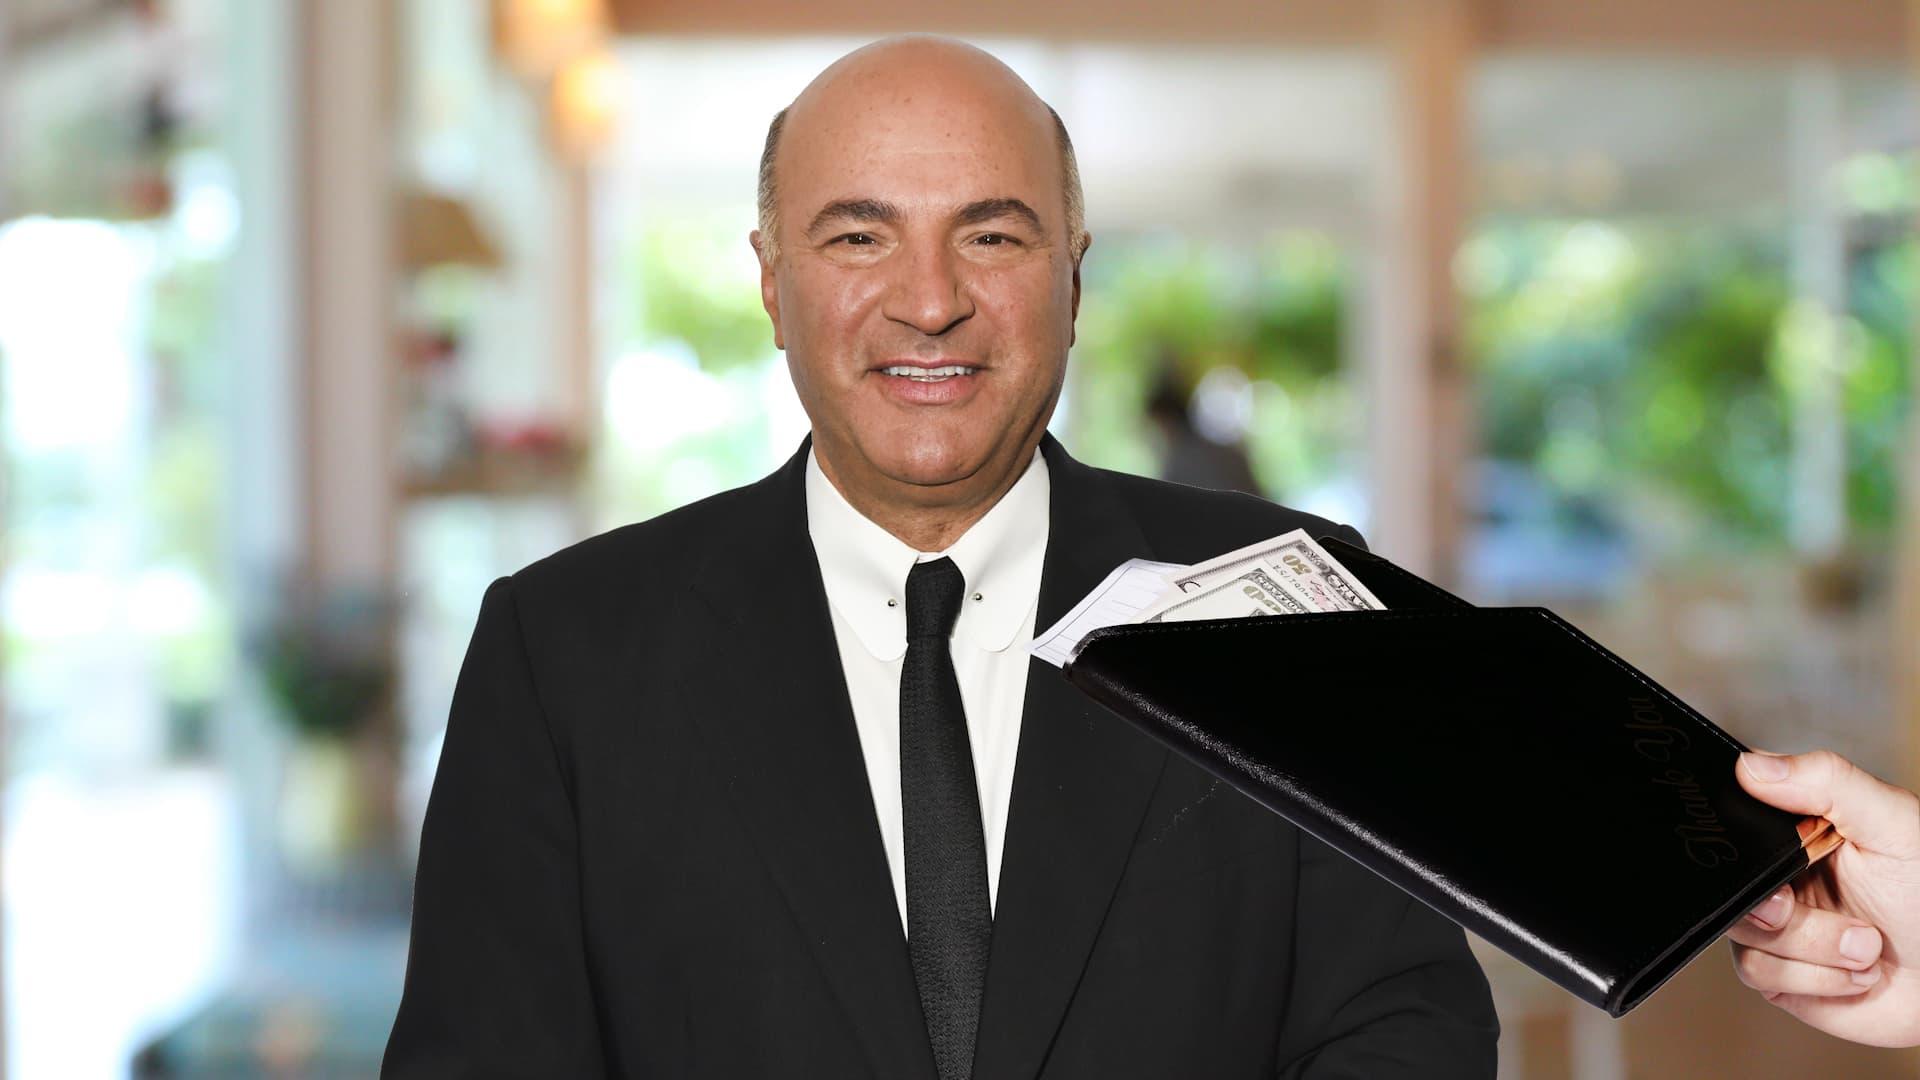 Kevin Oleary: Influential Media Mogul: Kevin O'Leary's Impact on Business and Finance